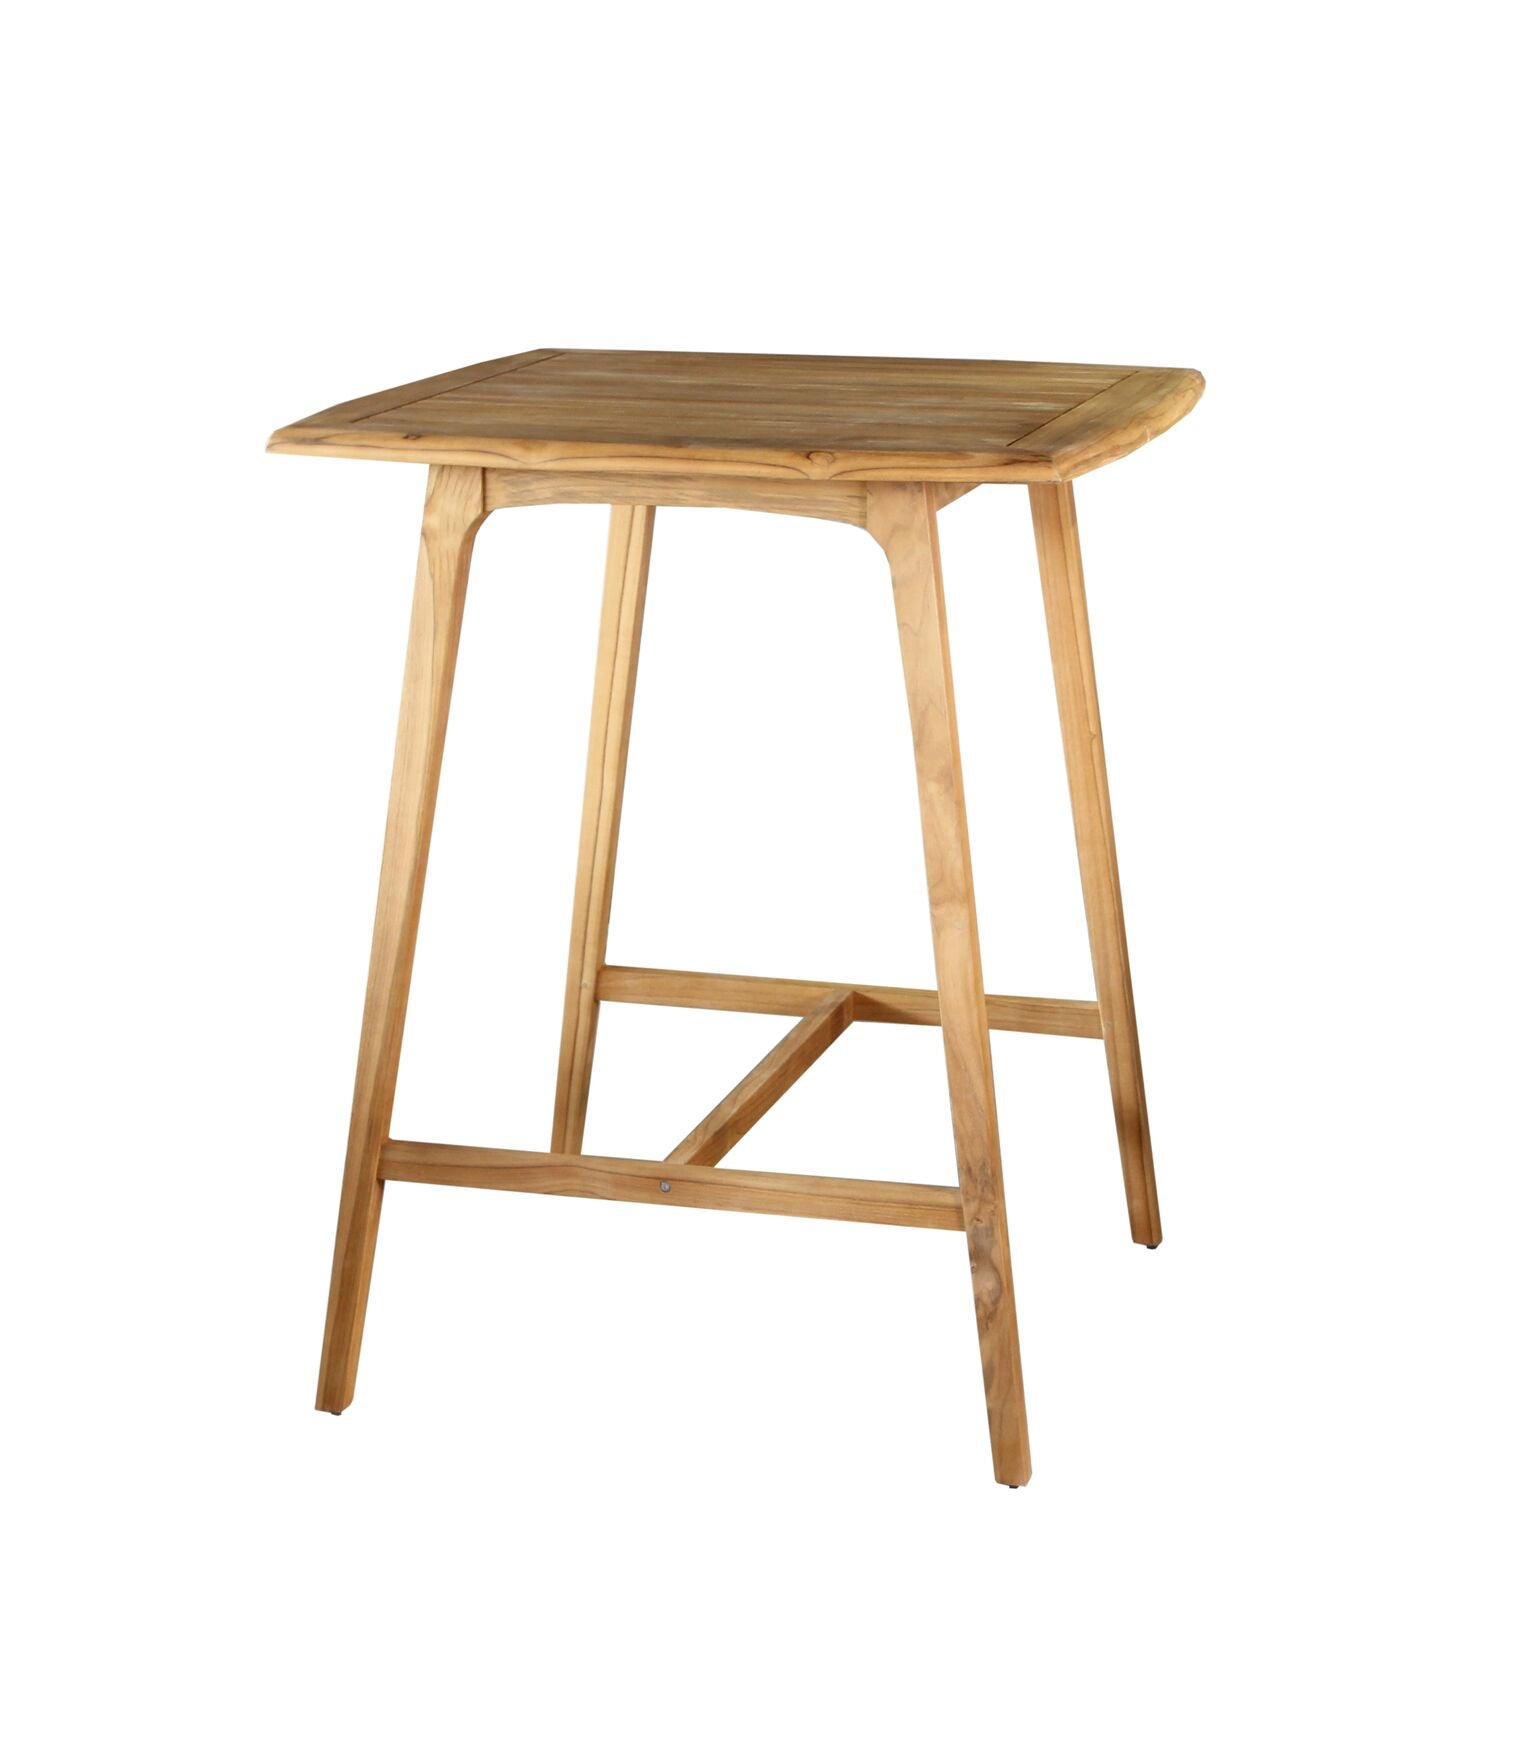 SALE - Sunqueen Bar Table - NEW